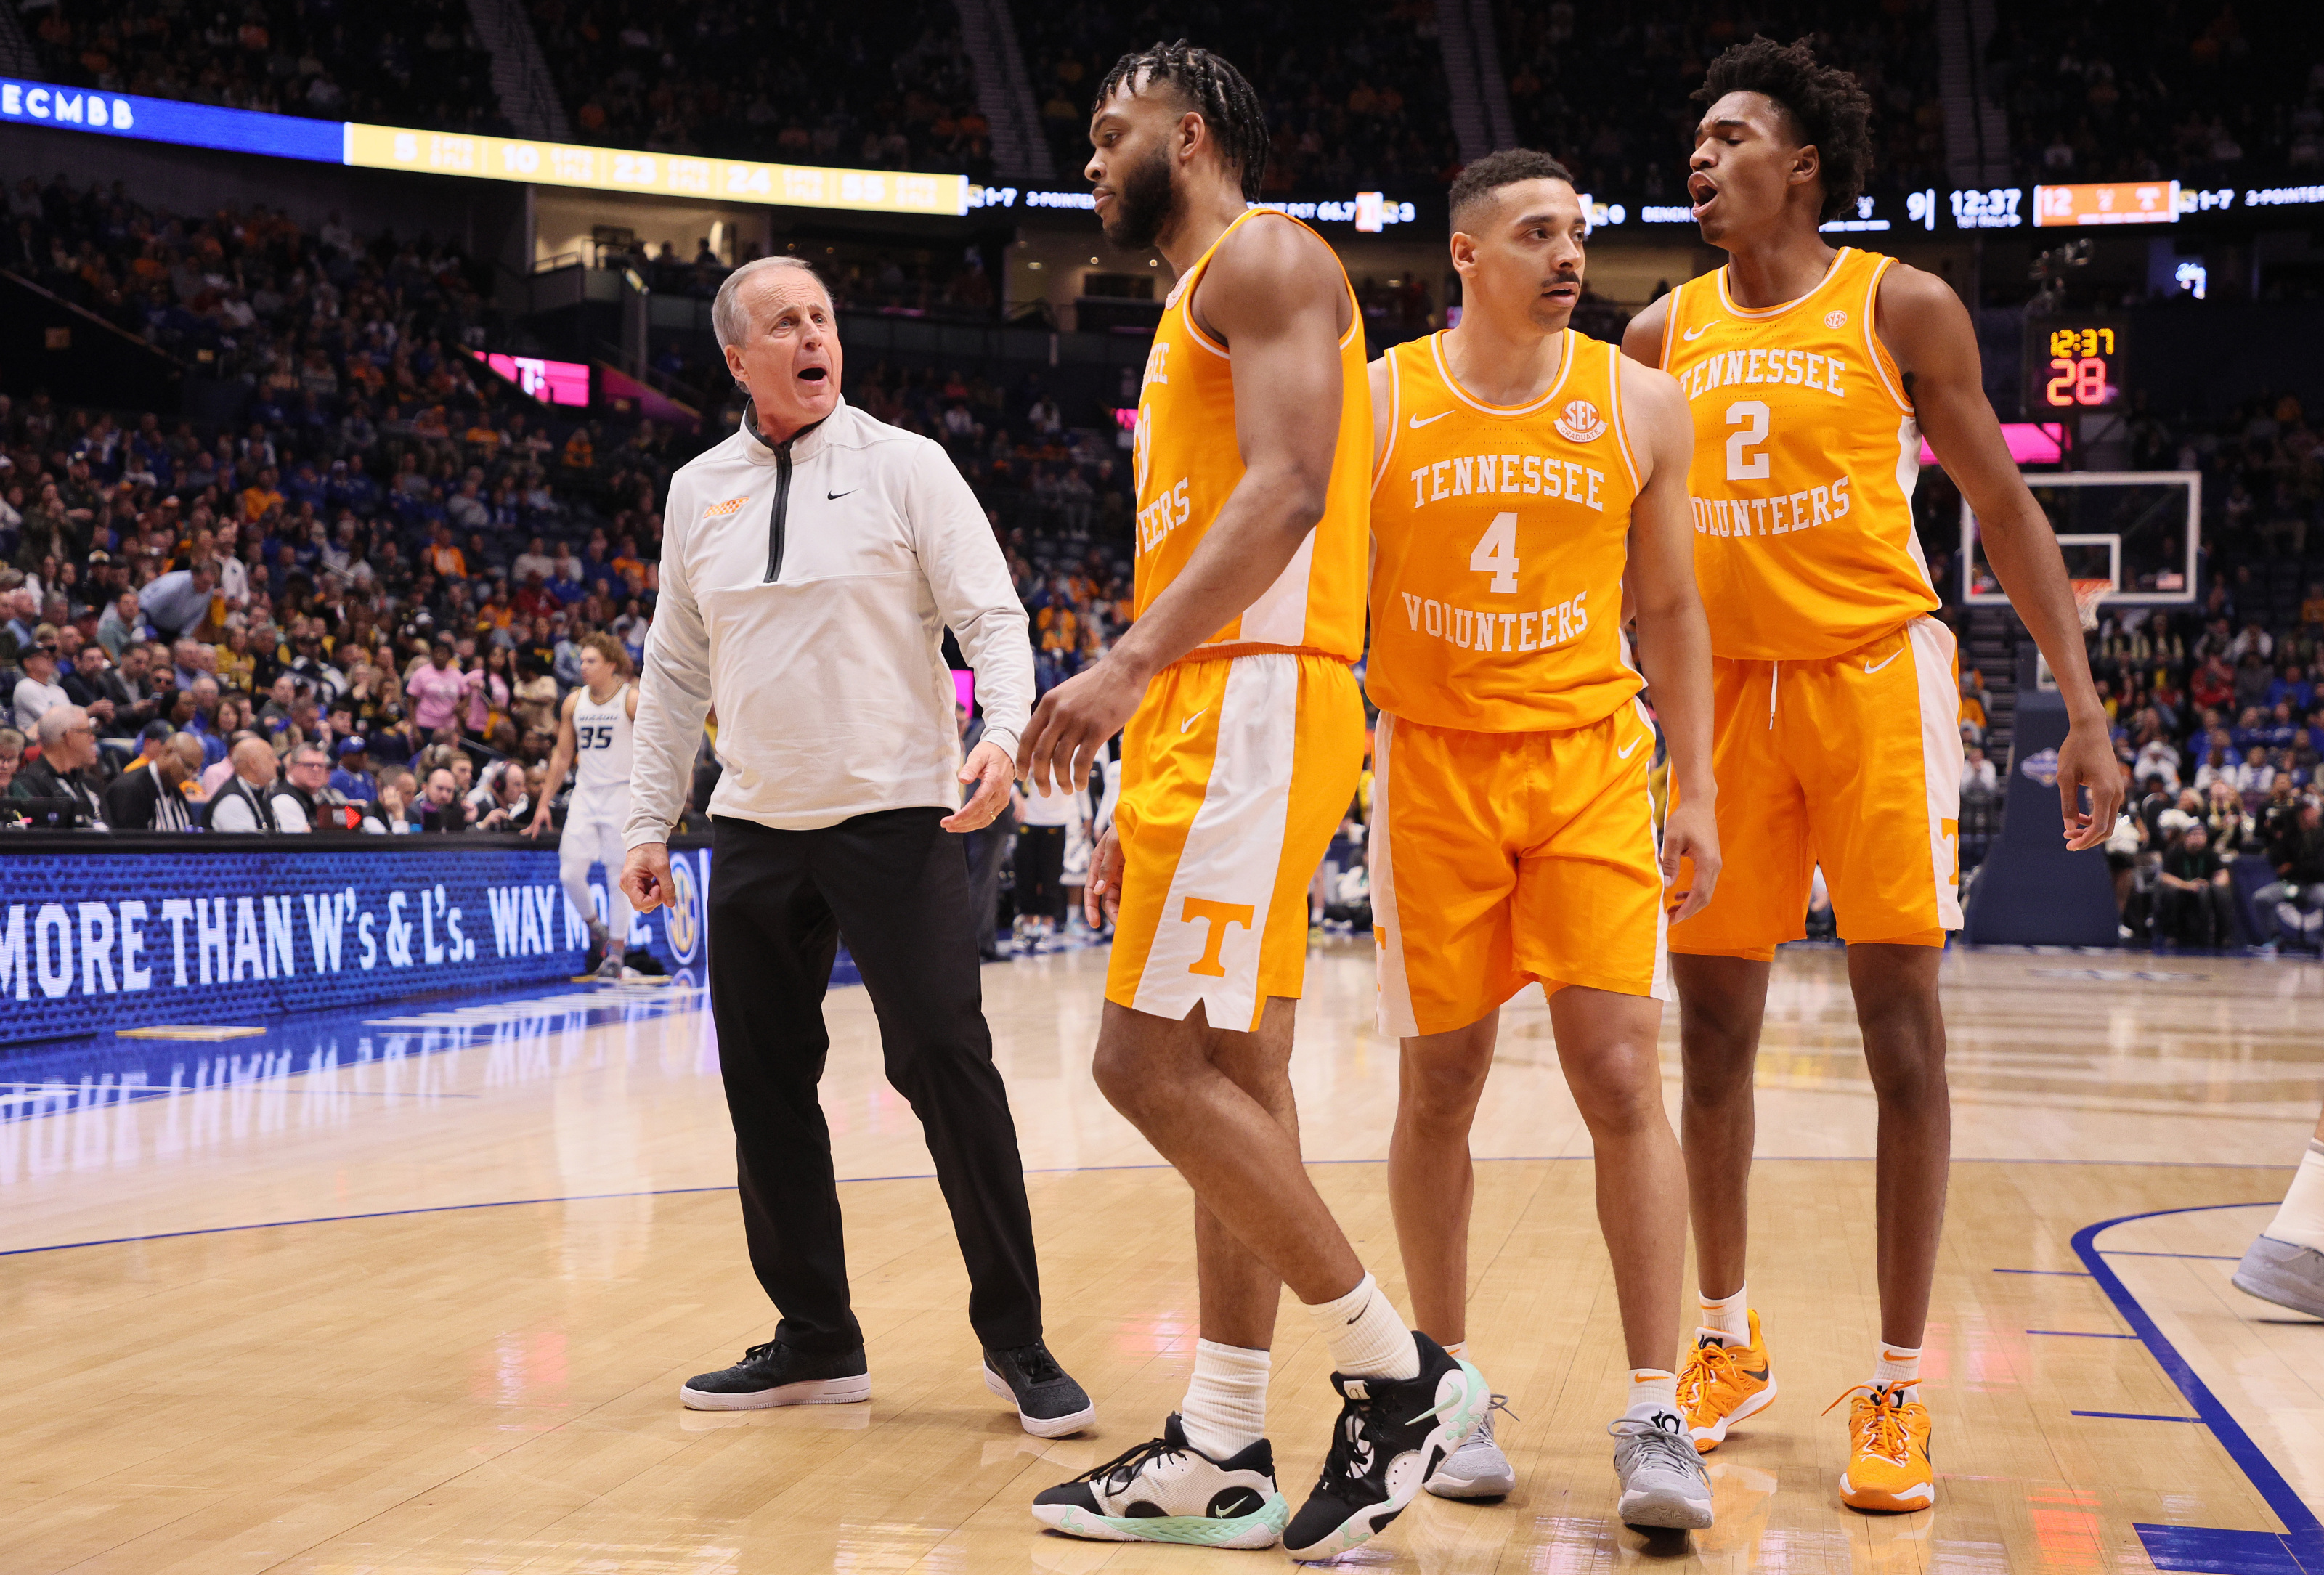 Tennessee vs Louisiana NCAA Tournament Round 1 How to watch, odds and predictions for March Madness